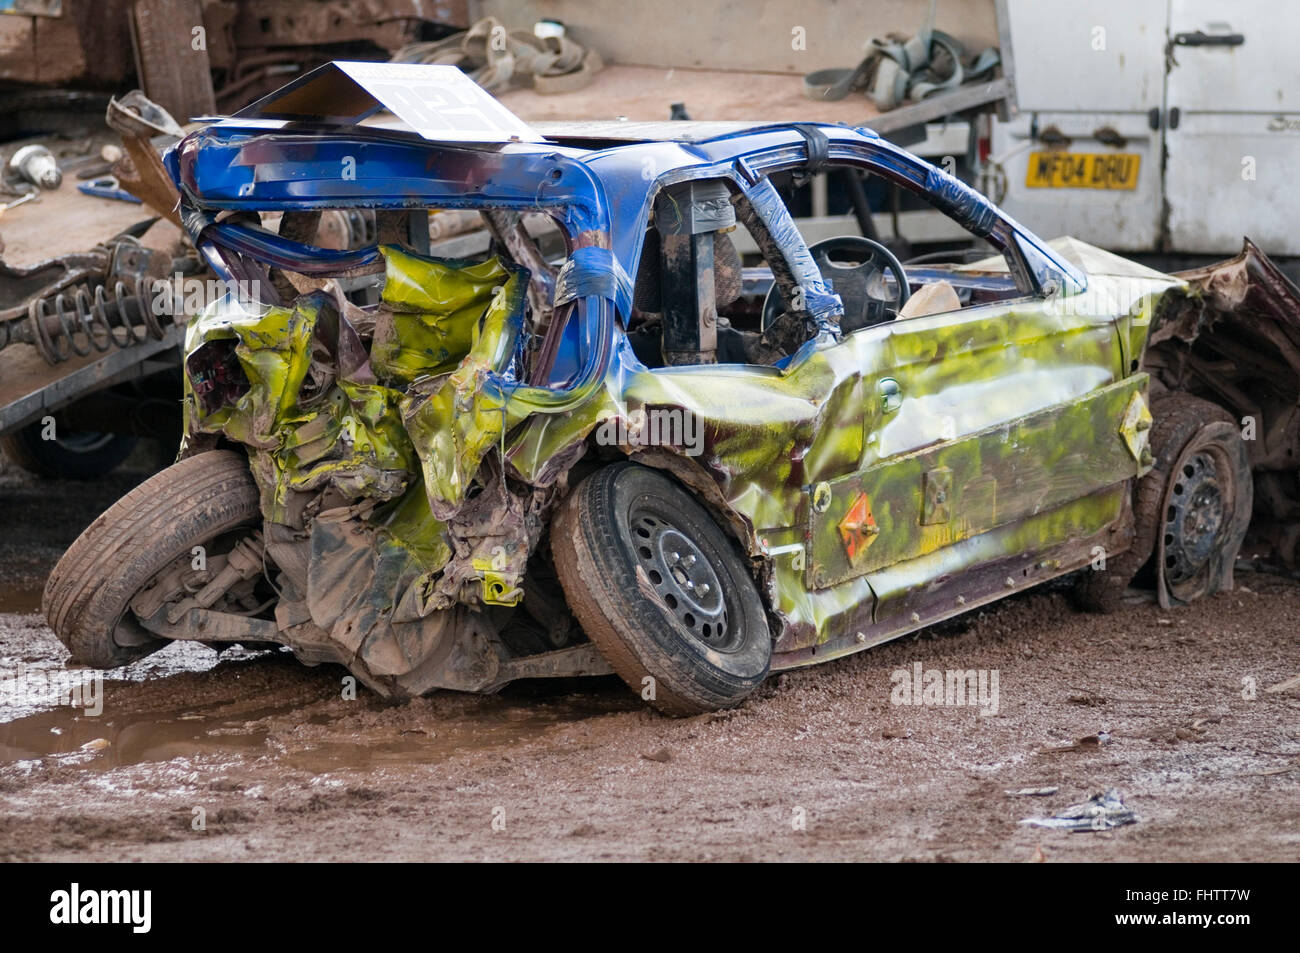 smashed up old car at demo derby destruction demolition derbies stock cars race races racing dent dents dented wreck wrecked cra Stock Photo